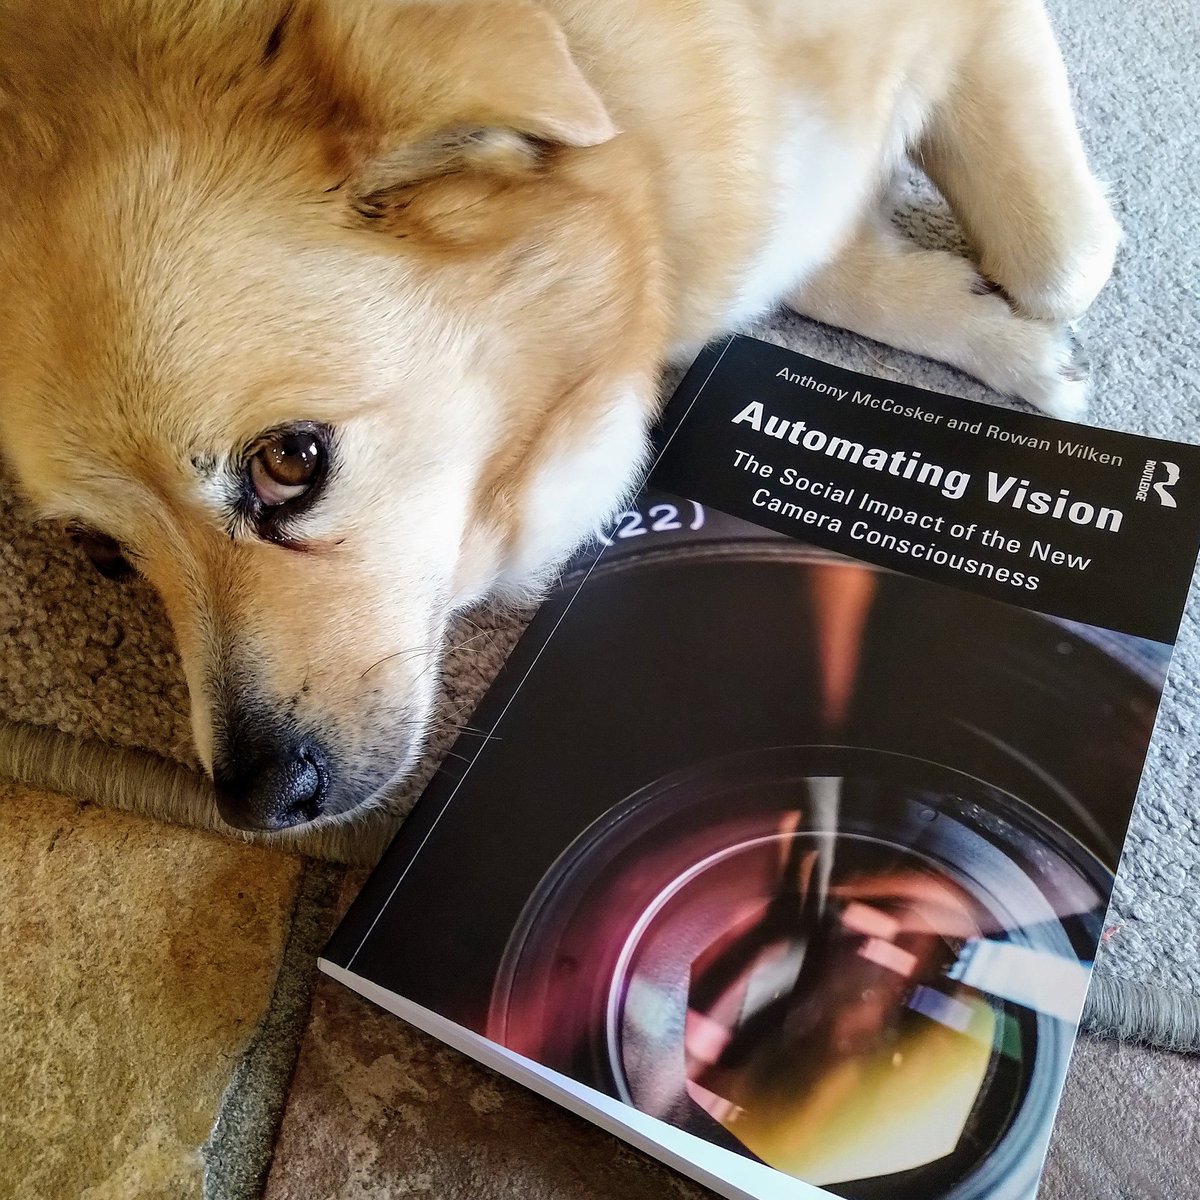 I finally got a copy of my new book Automating Vision with @endotician. Machine vision, AI, camera consciousness. Chester here thinks it's excellent and that you should buy it, read it and recommend it to others. bit.ly/3jxjeuM.